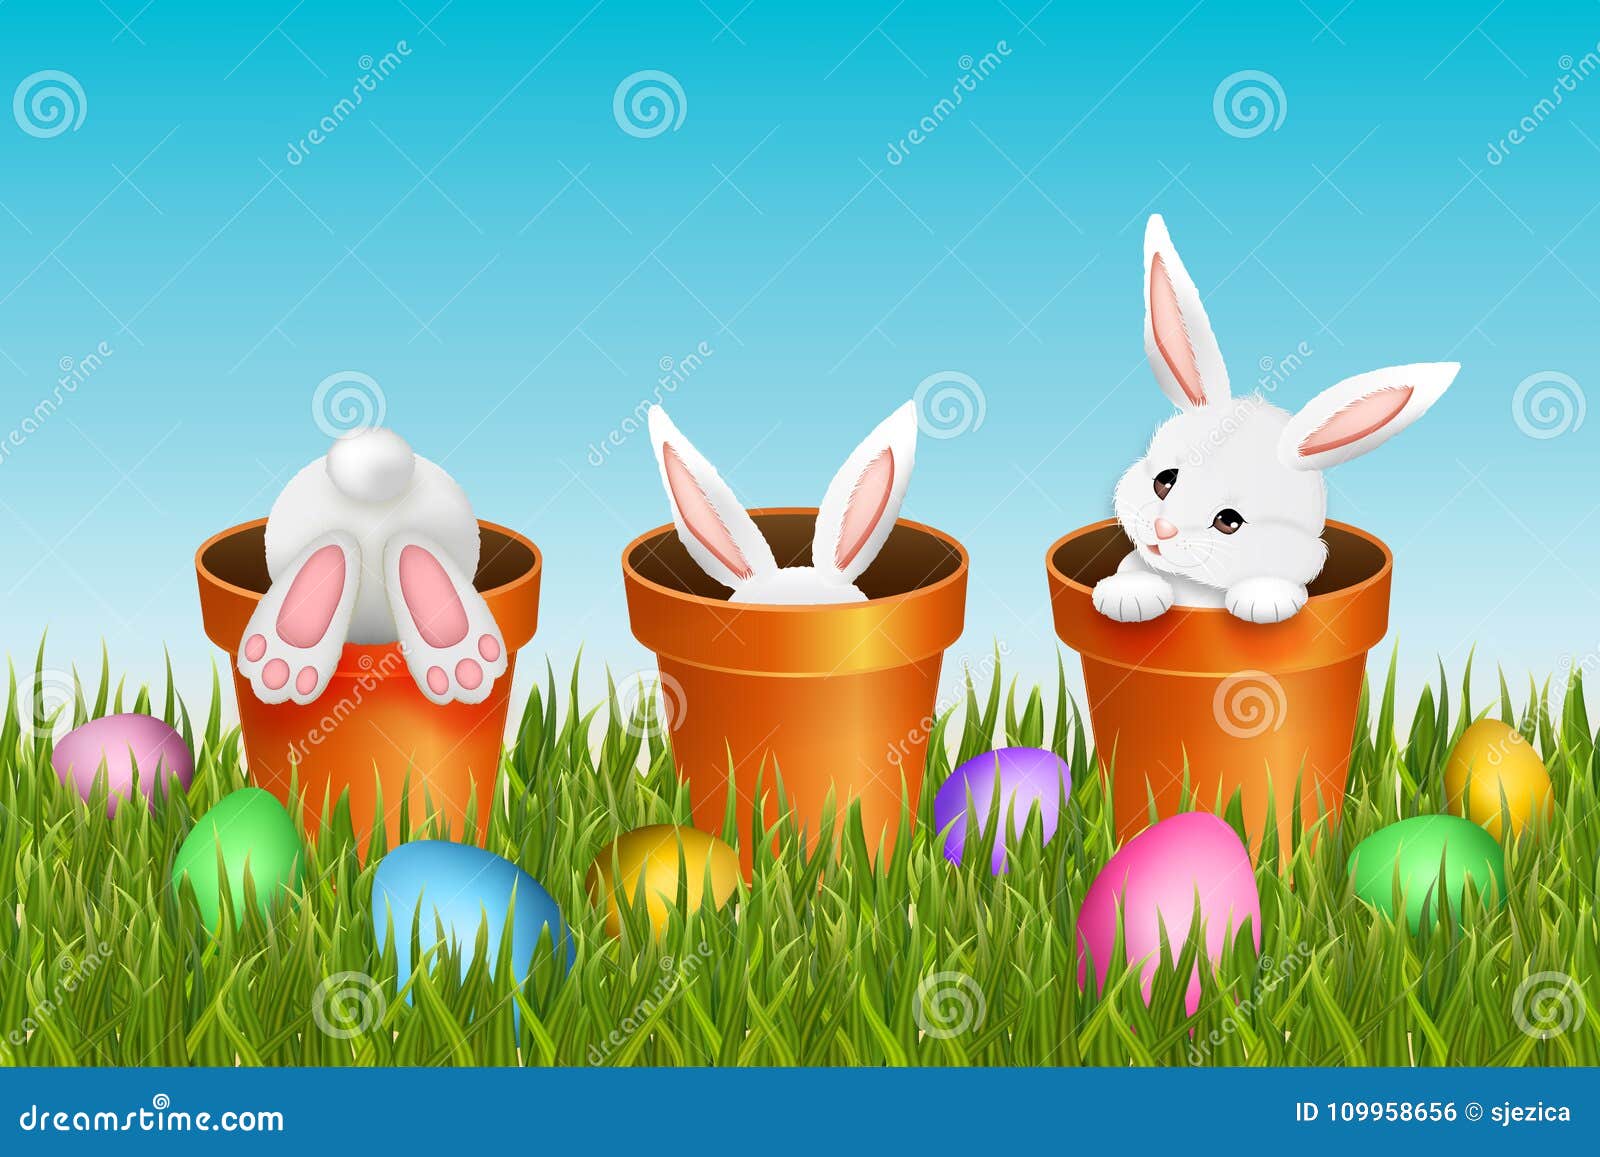 easter background with three adorable white rabbits